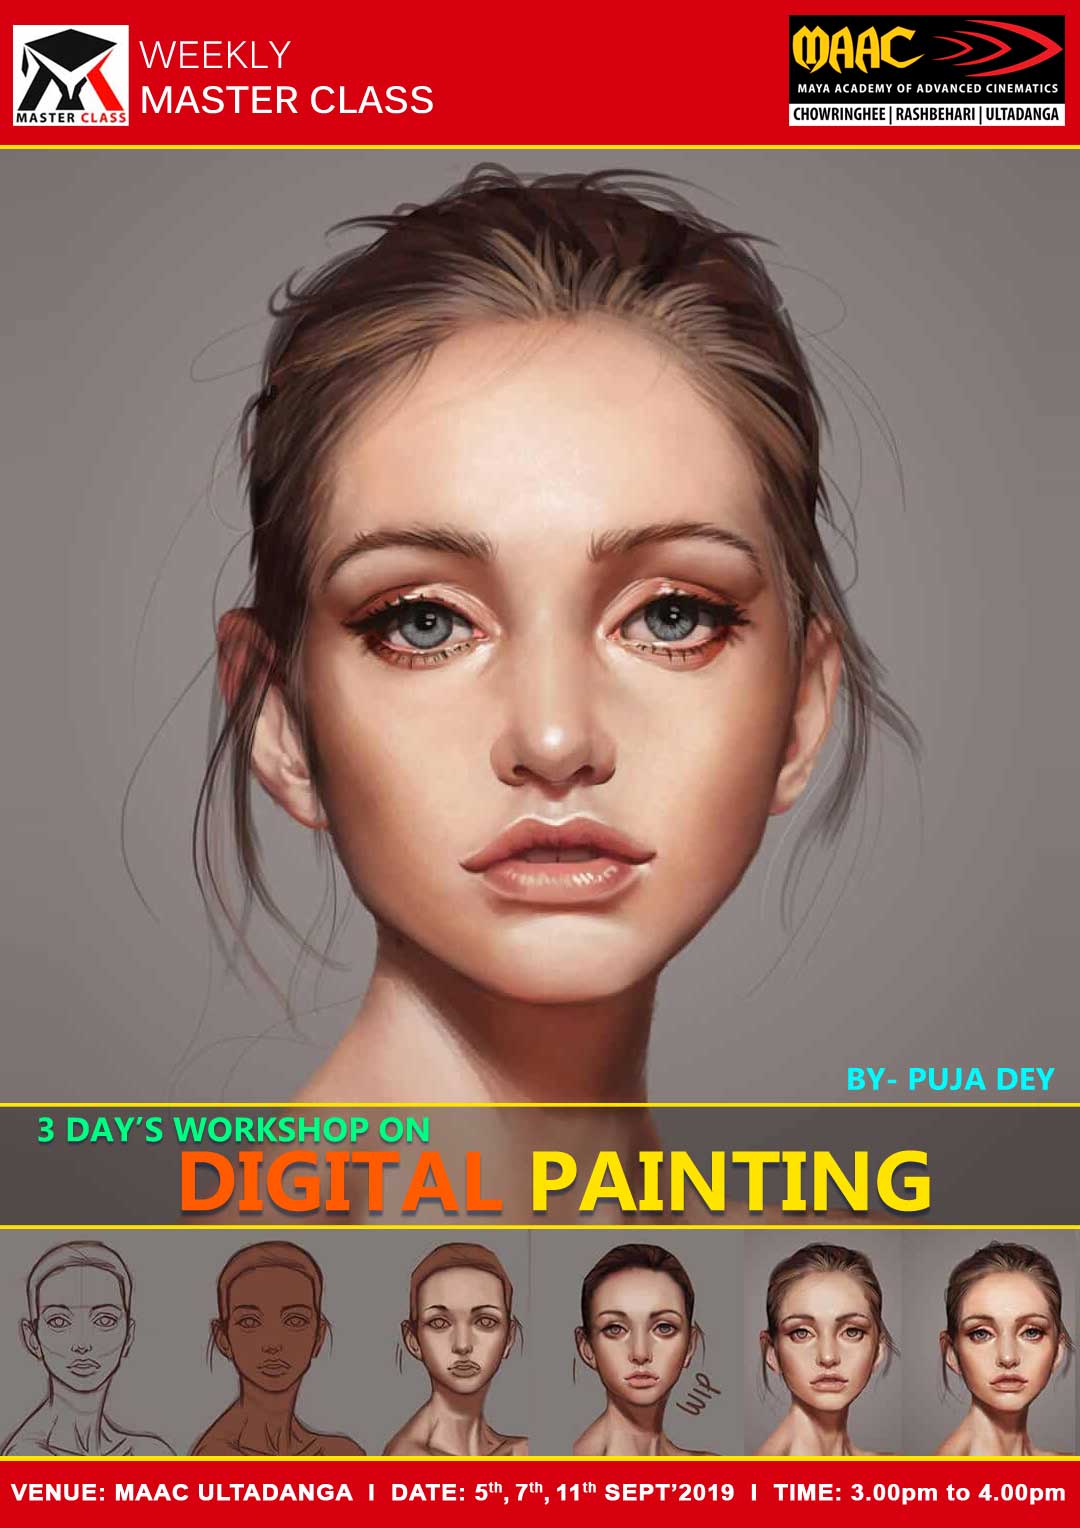 Weekly Master Class on 3 Days Workshop on Digital Painting